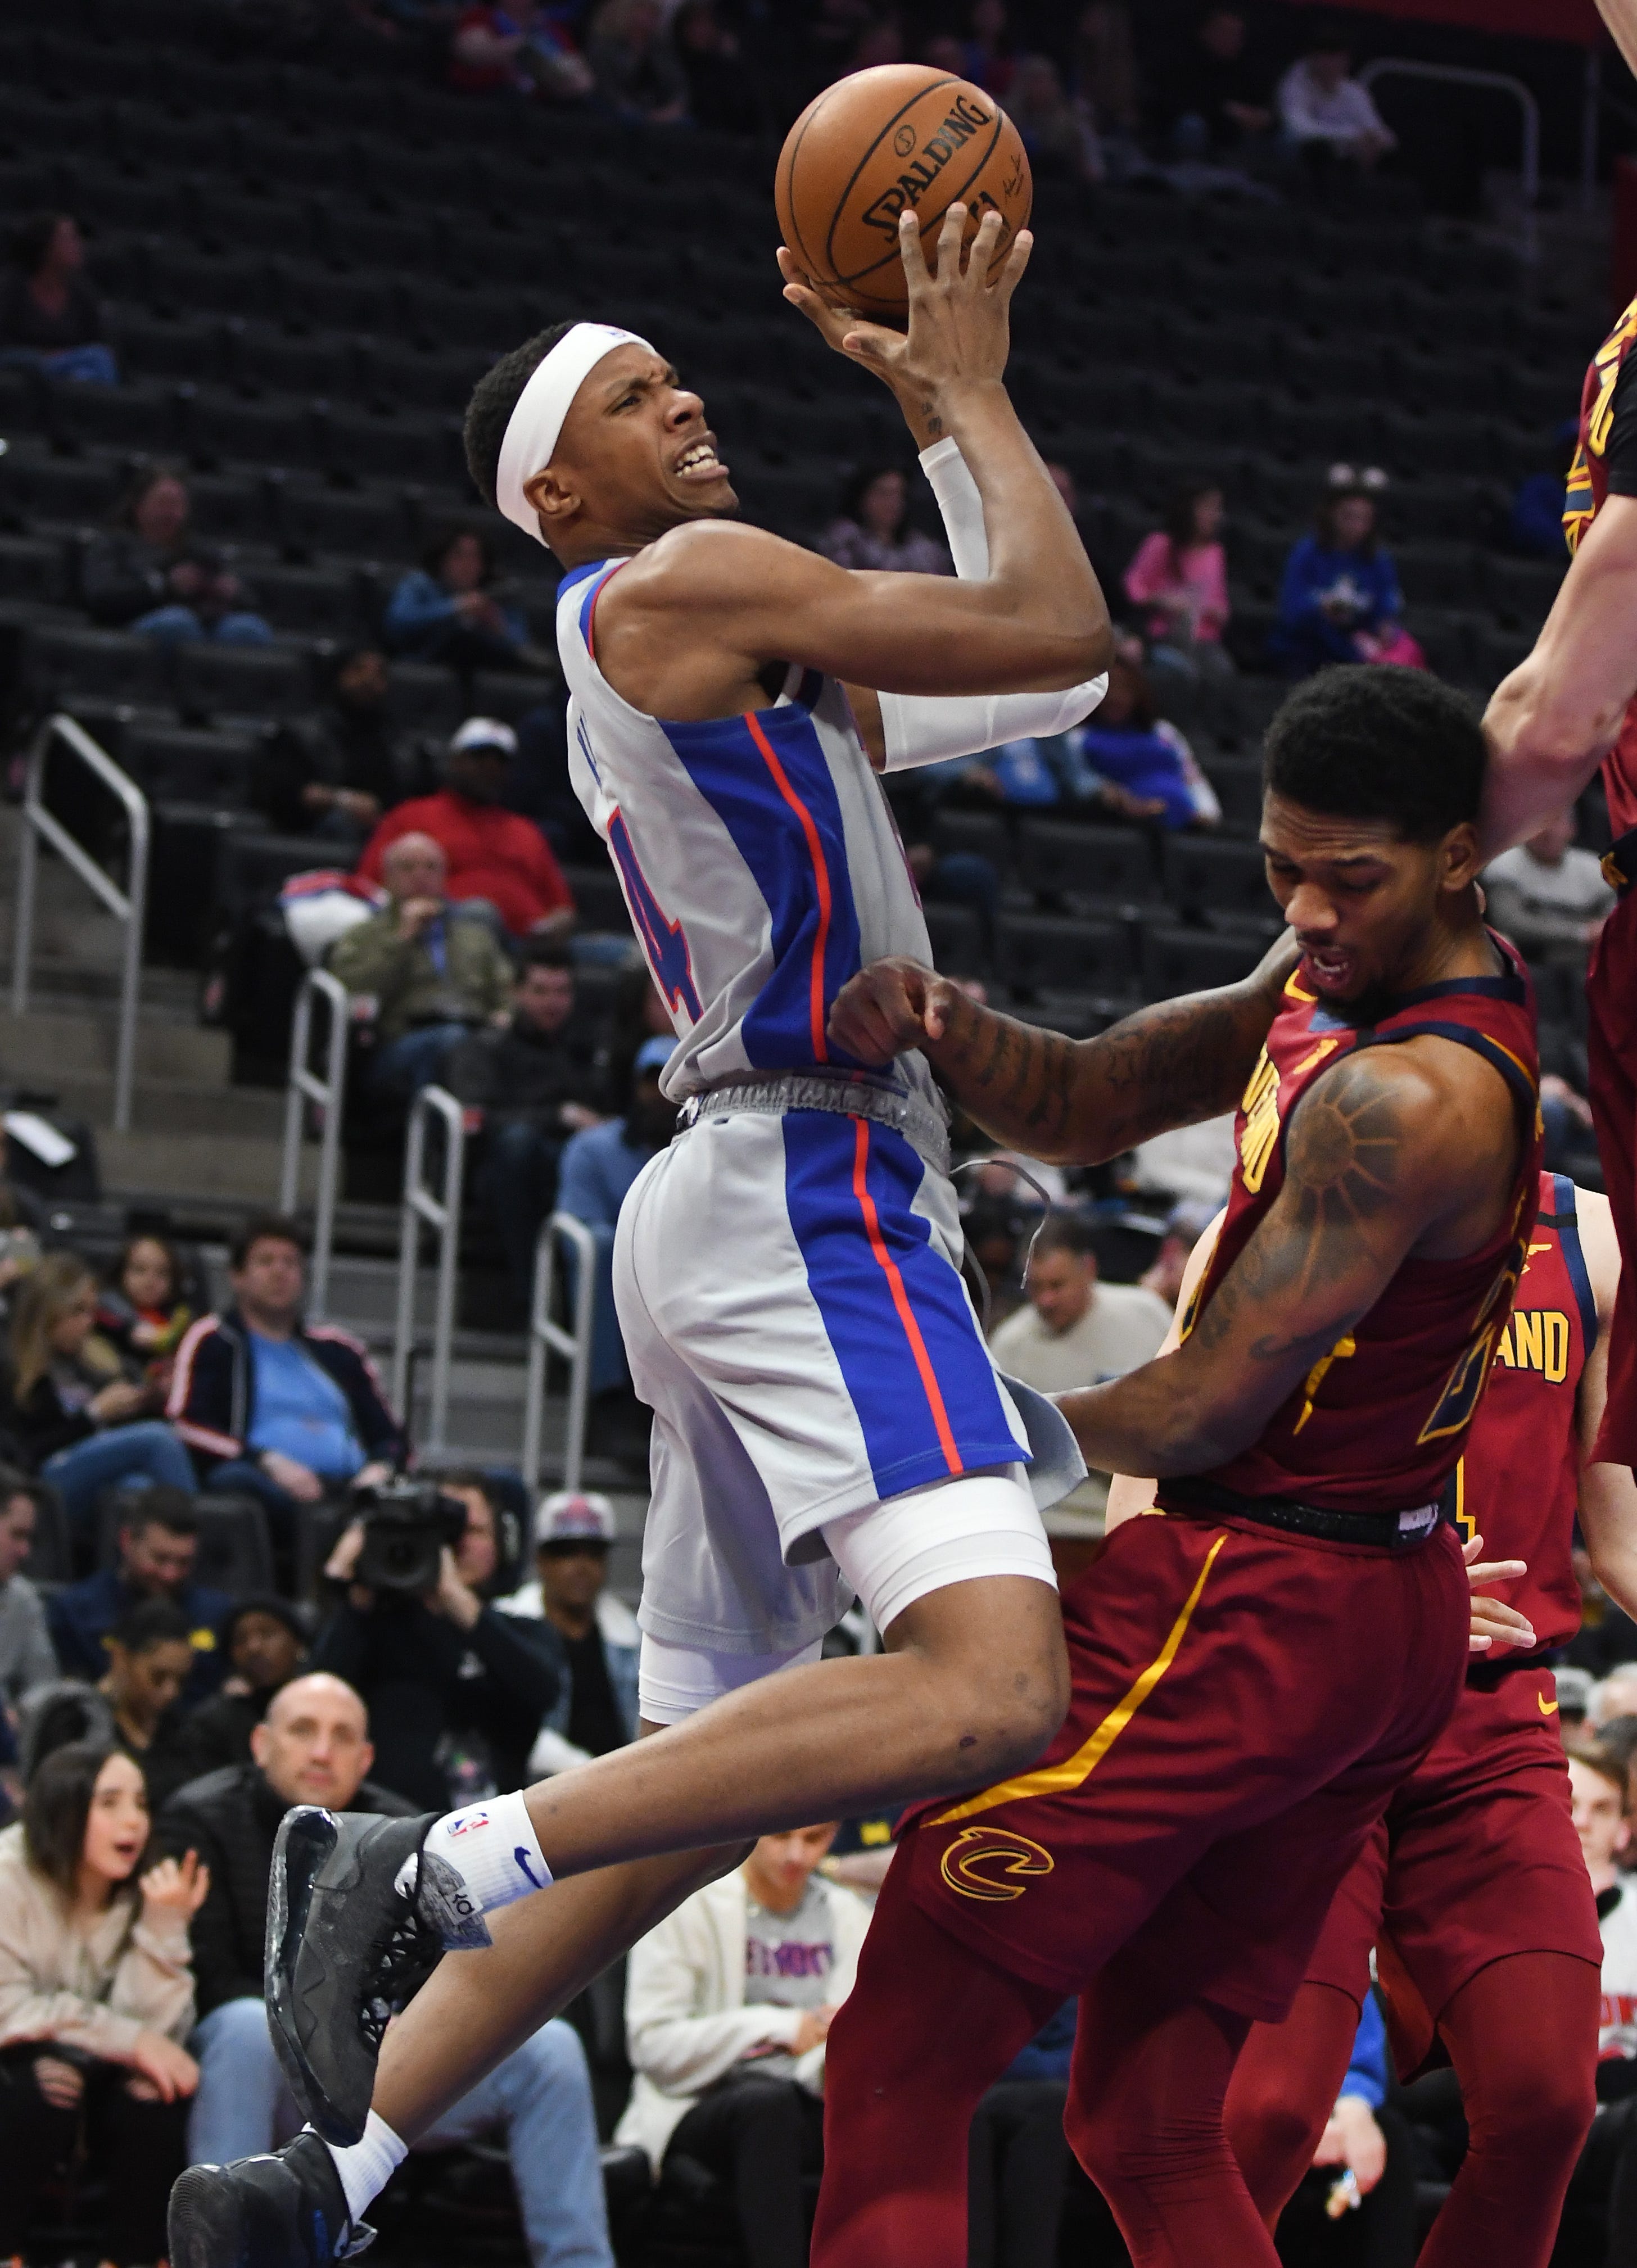 Pistons' Louis King attacks the basket with Cavaliers' Alfonzo McKinnie defending in the second quarter.